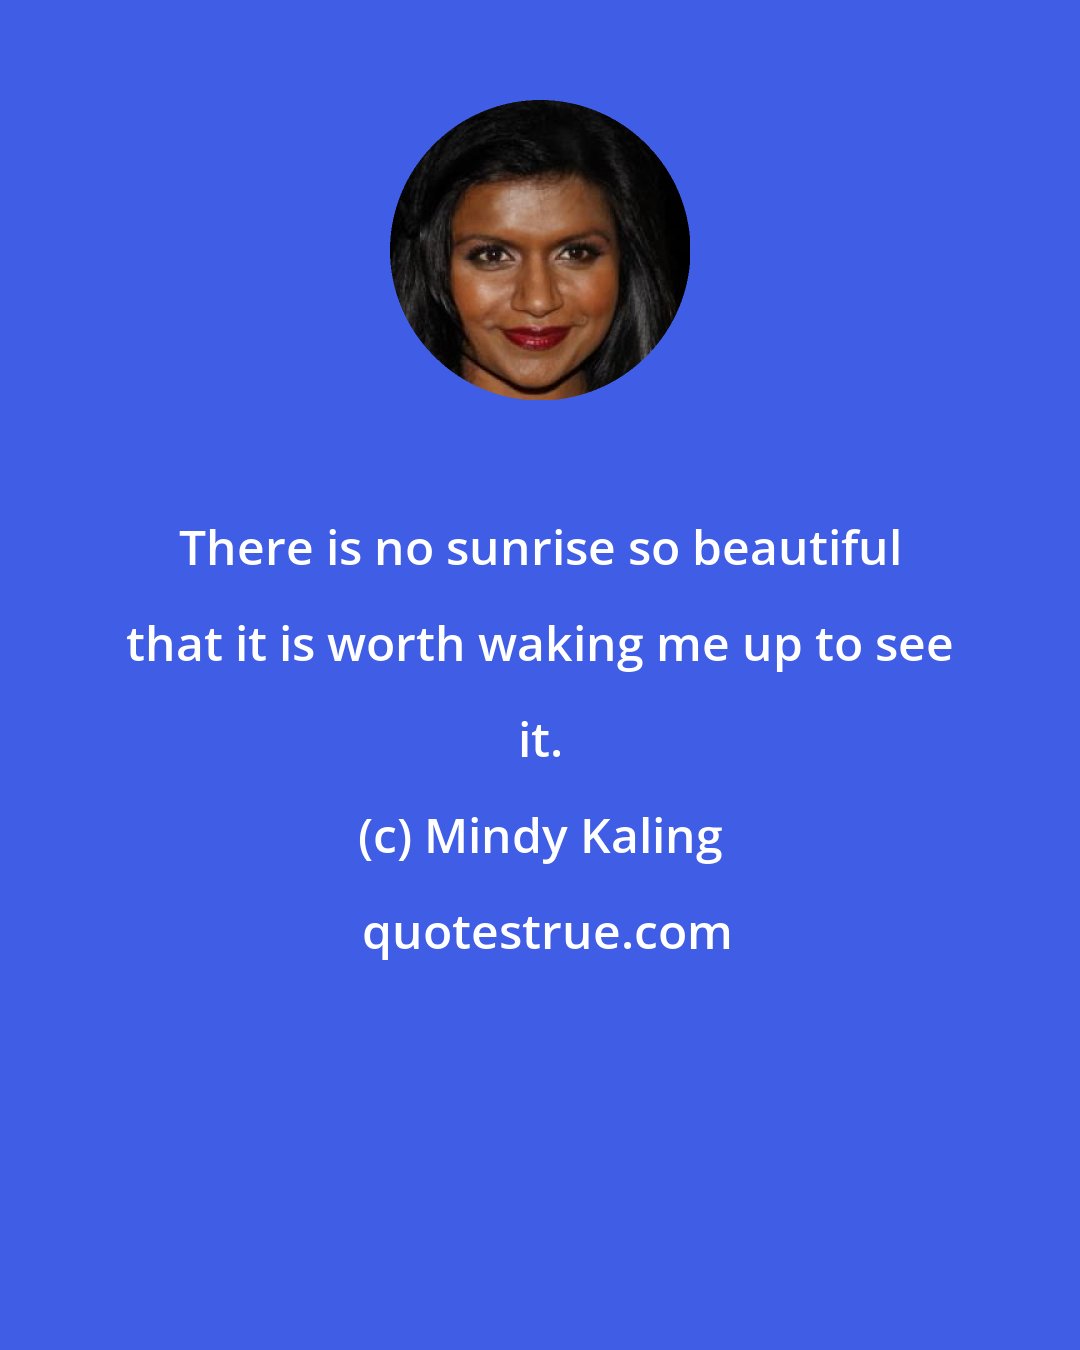 Mindy Kaling: There is no sunrise so beautiful that it is worth waking me up to see it.